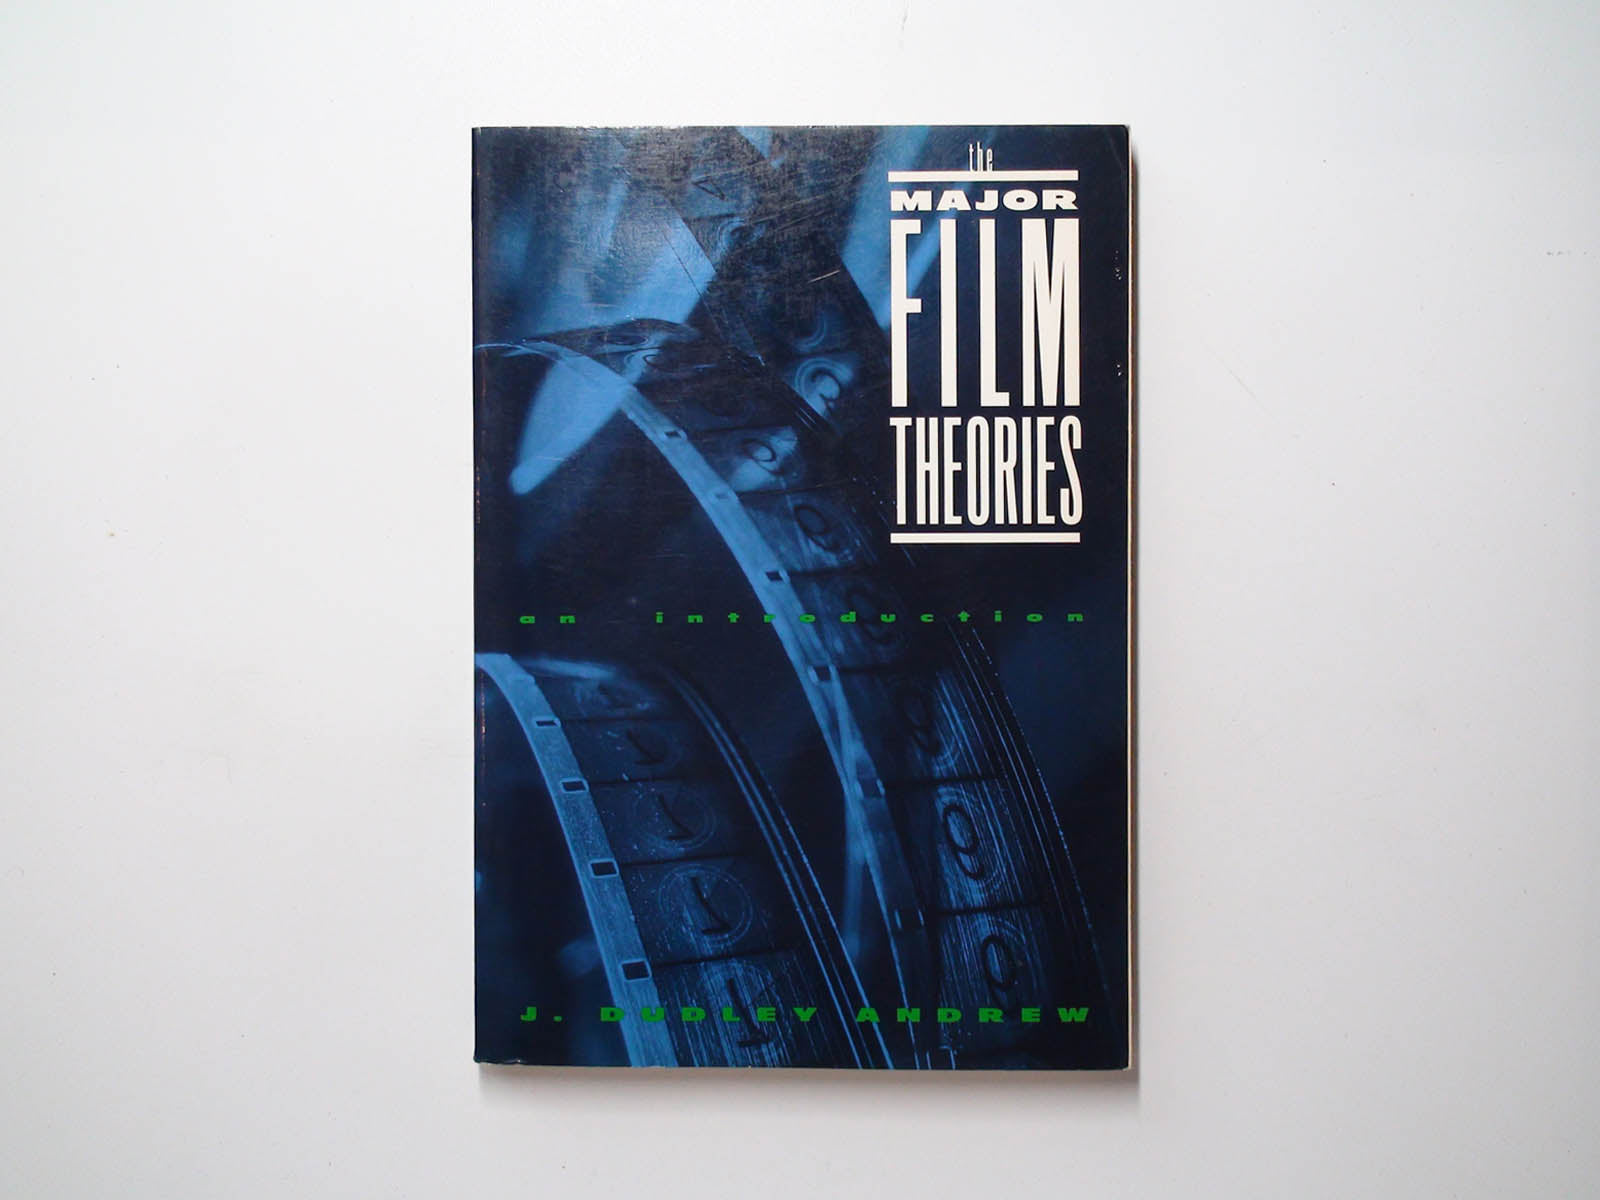 The Major Film Theories, Andrew, J. Dudley, Paperback, 1976